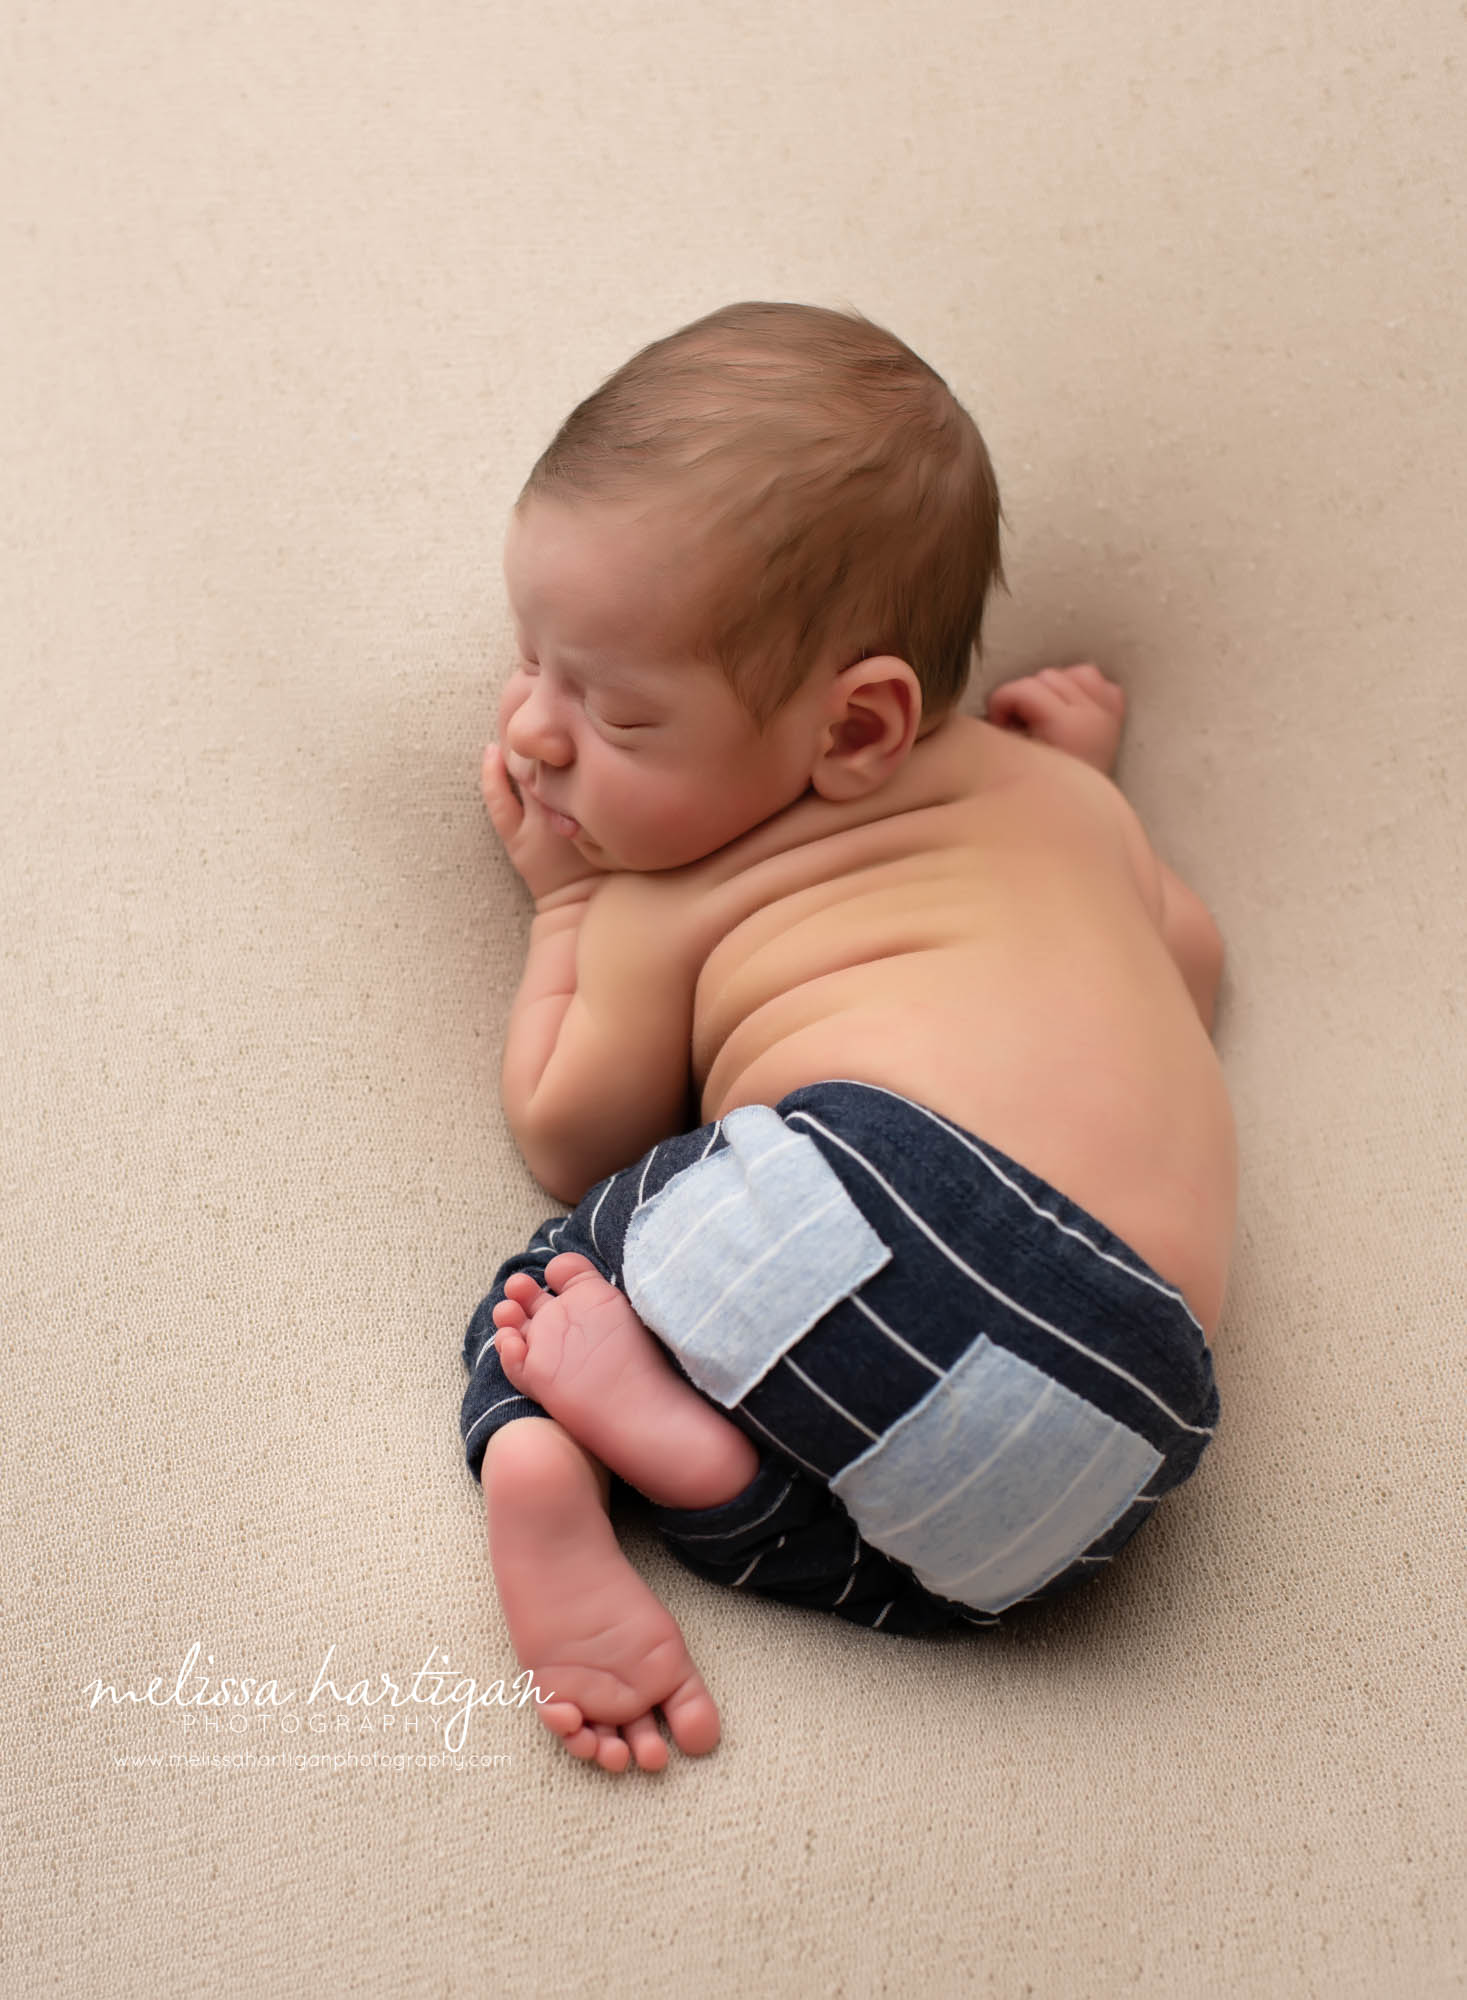 baby posed on tummy with back and bottom up wearing navy blue stripped pants